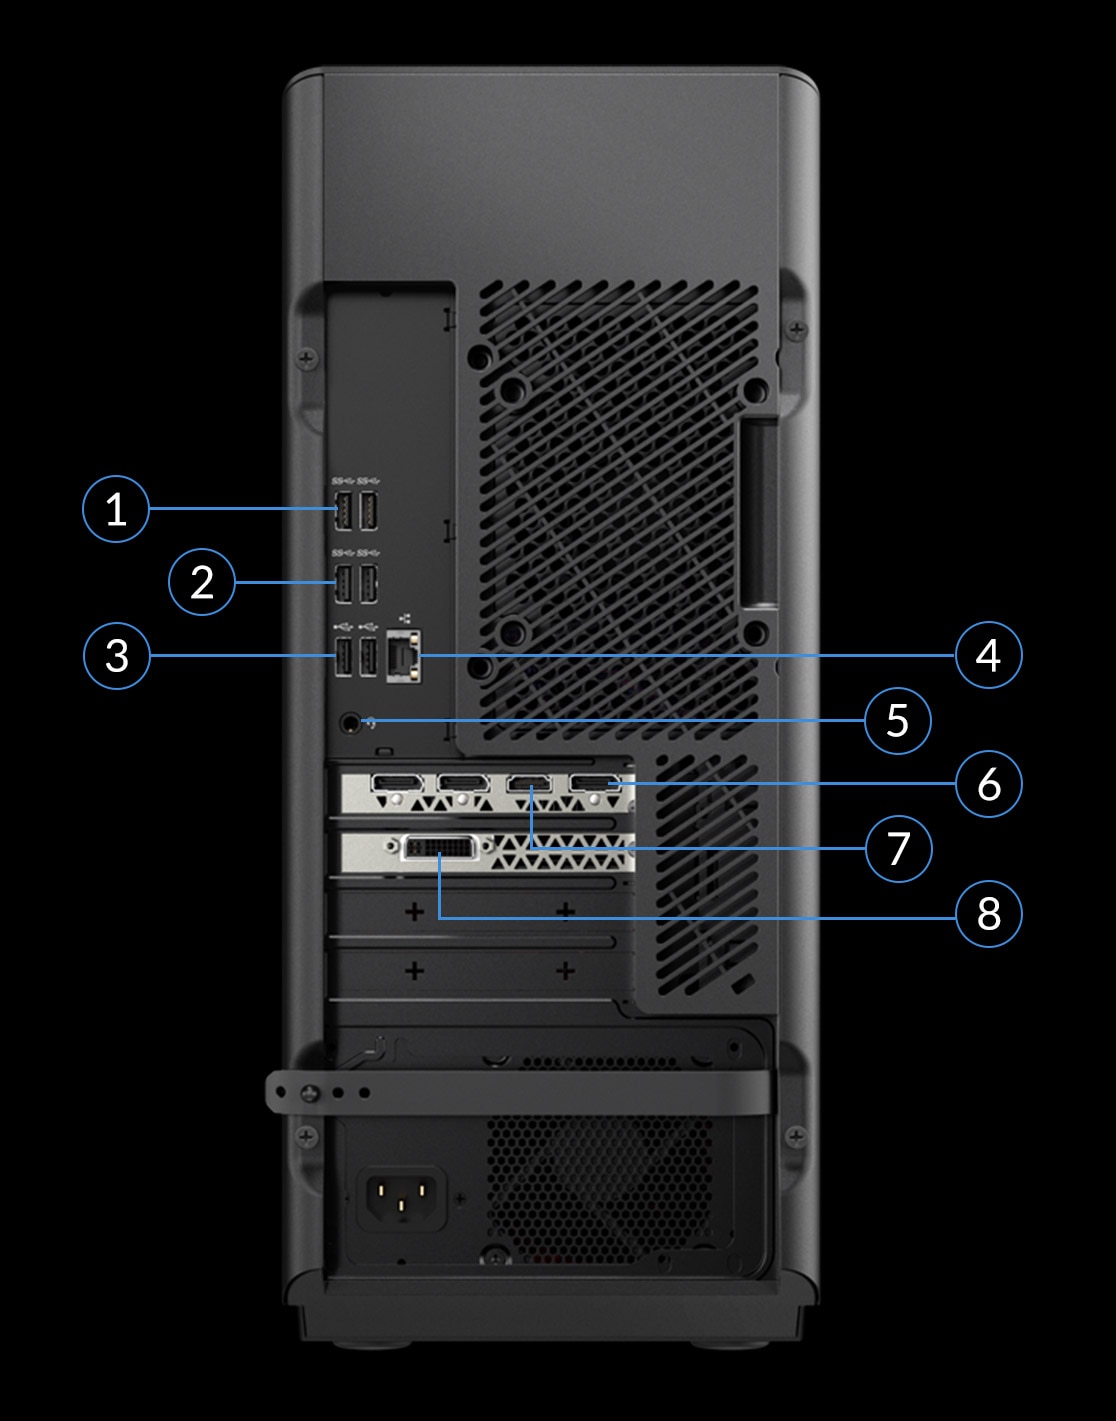 Lenovo Legion T730 Tower rear view with numbers for port identification.